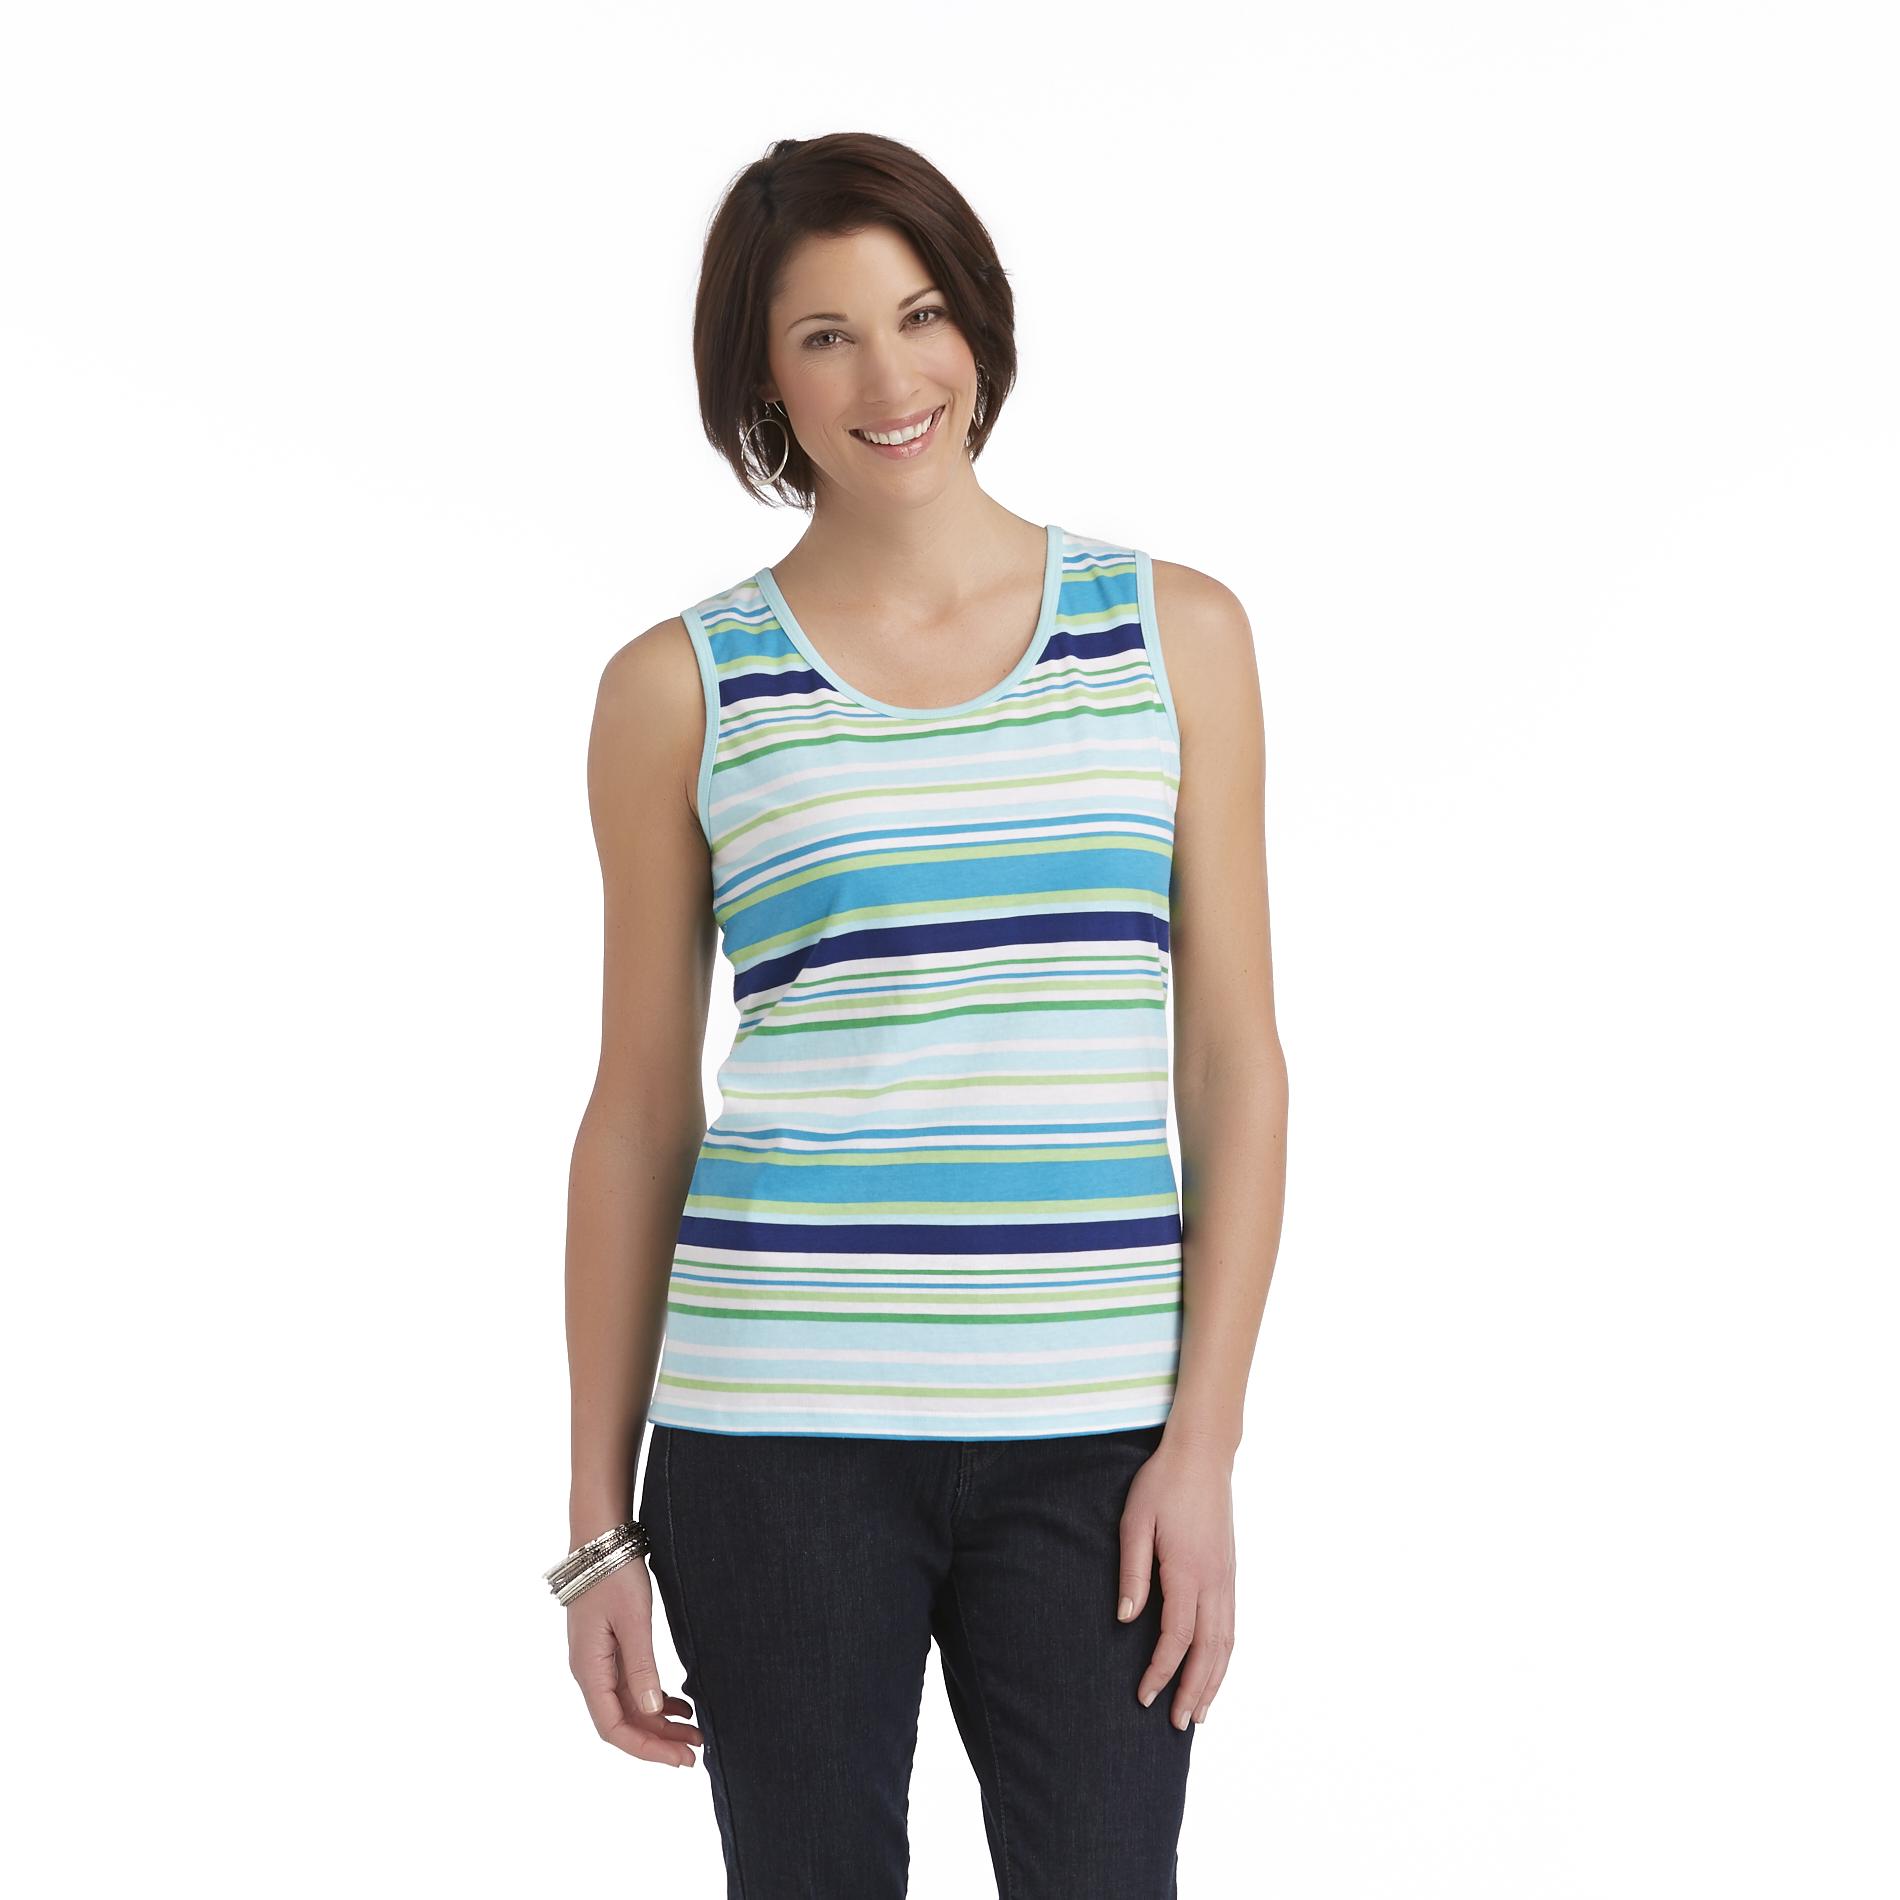 Basic Editions Women's Scoop Neck Tank Top - Striped